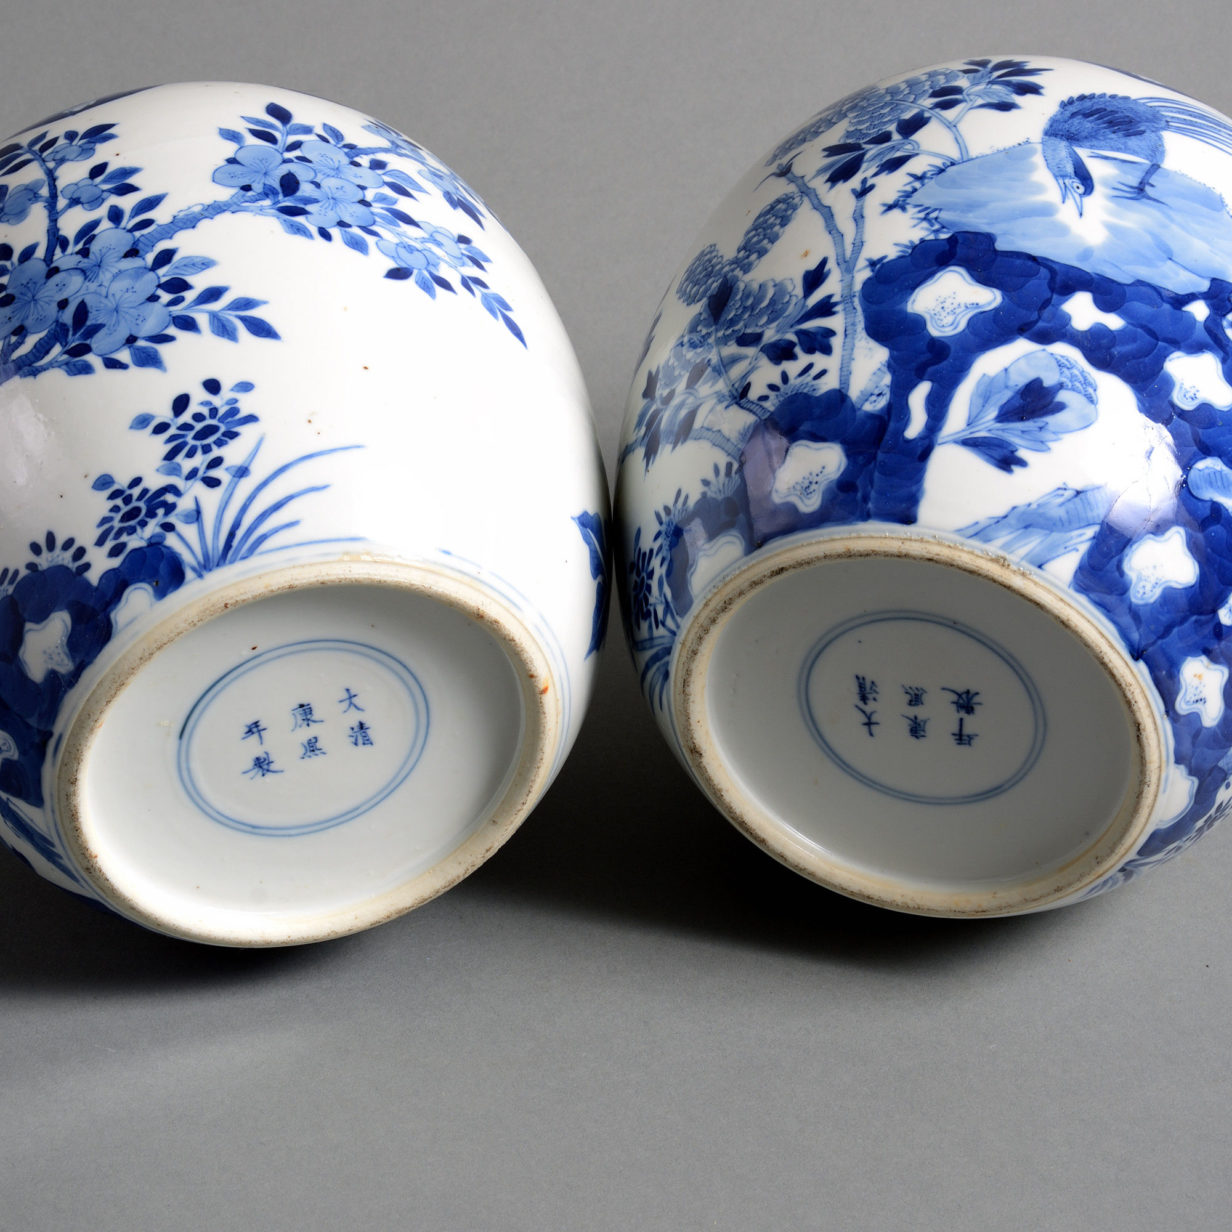 A pair of 19th century qing dynasty blue & white porcelain vases